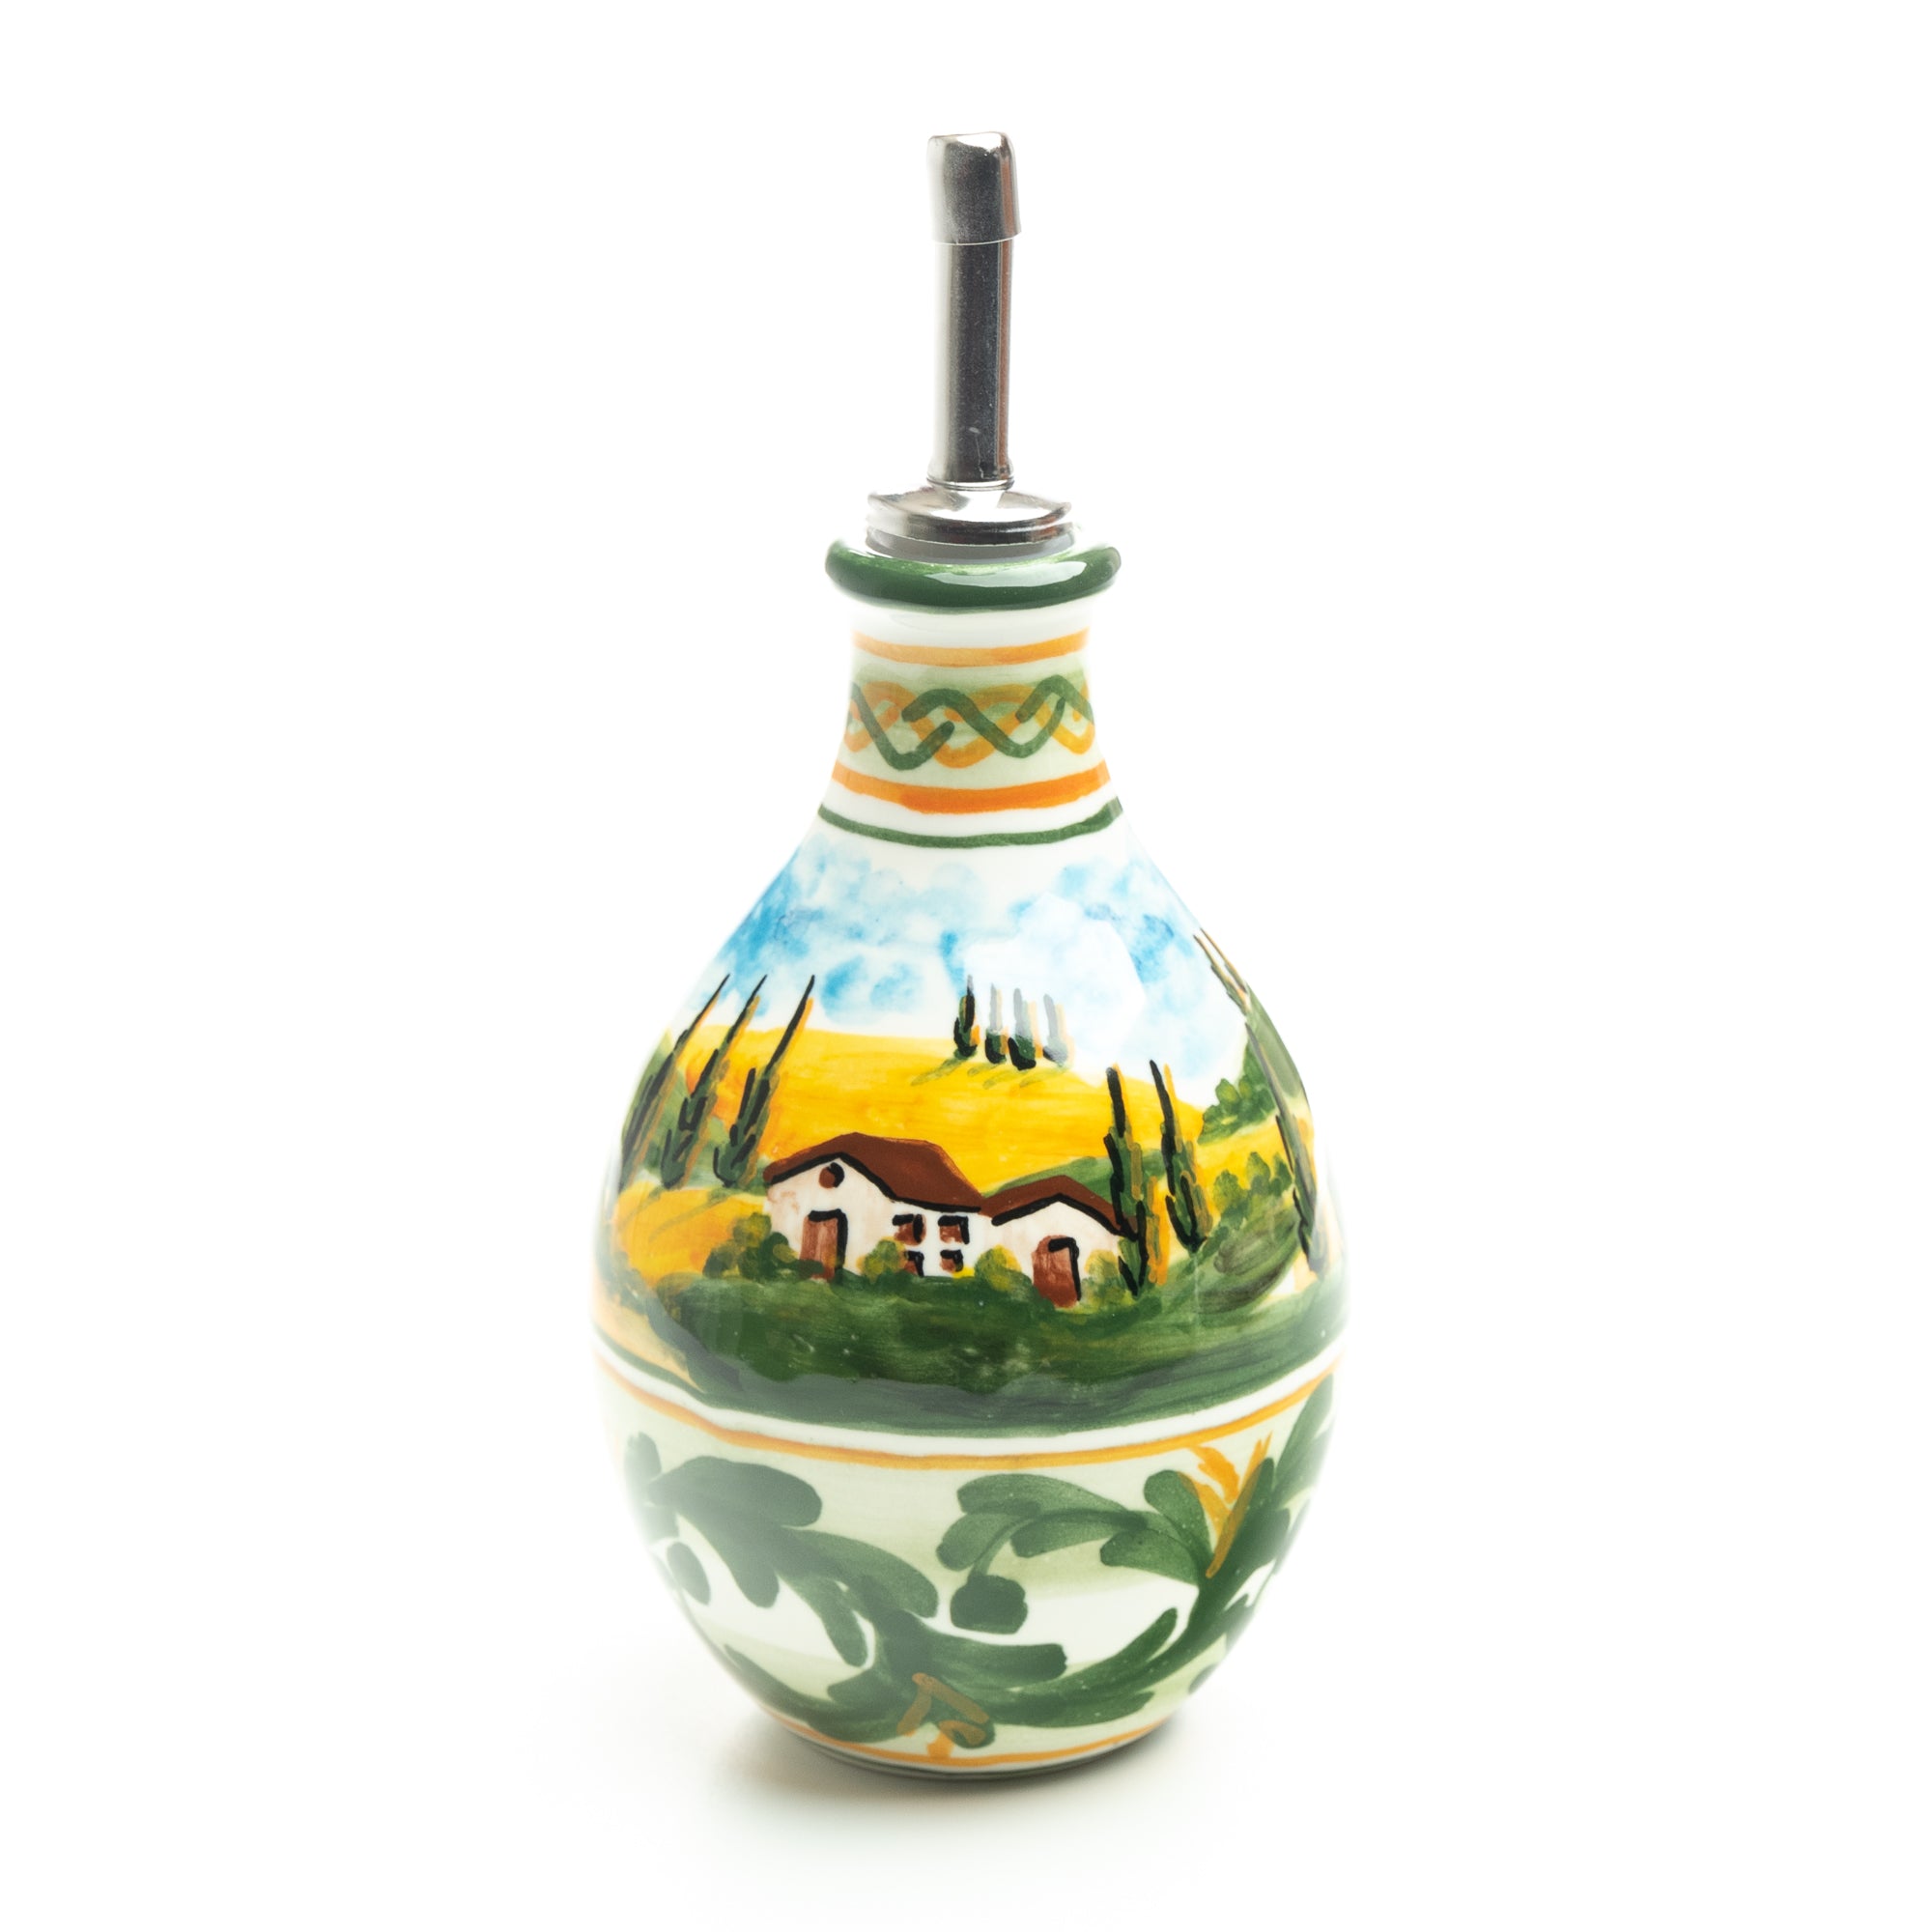 Tuscan Countryside Olive Oil Jar, ceramics, pottery, italian design, majolica, handmade, handcrafted, handpainted, home decor, kitchen art, home goods, deruta, majolica, Artisan, treasures, traditional art, modern art, gift ideas, style, SF, shop small business, artists, shop online, landmark store, legacy, one of a kind, limited edition, gift guide, gift shop, retail shop, decorations, shopping, italy, home staging, home decorating, home interiors